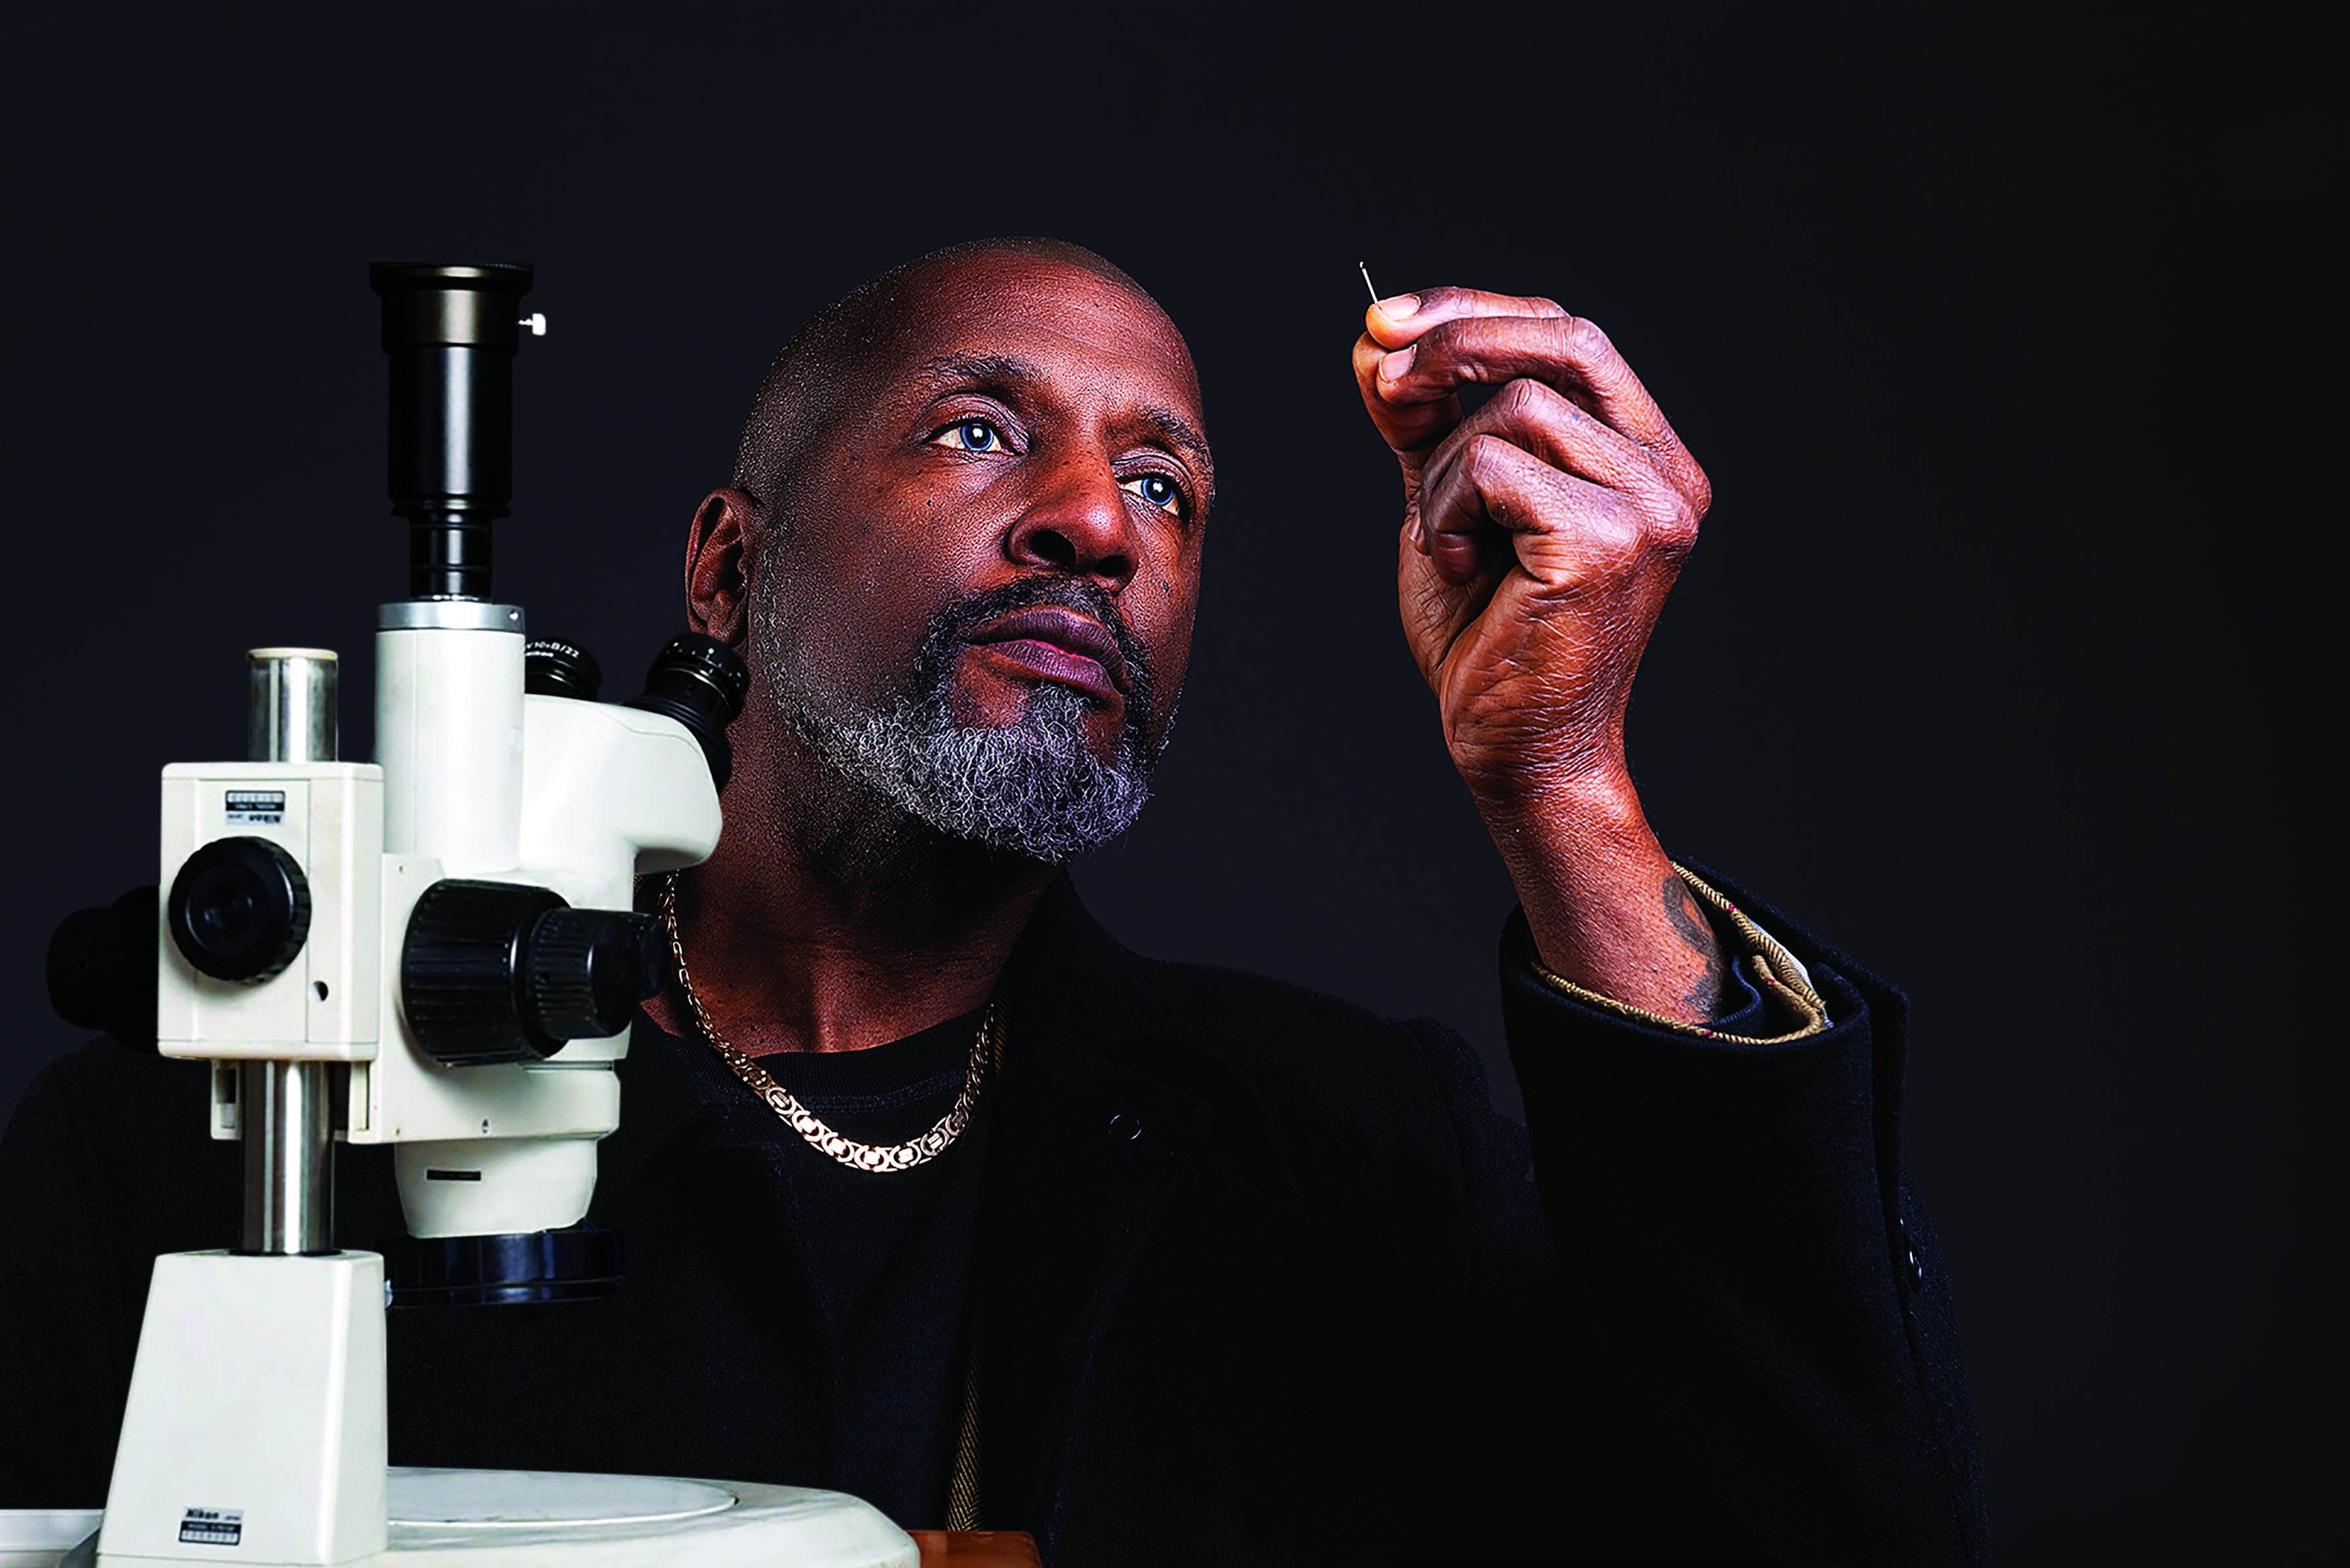 Micro sculptor Willard Wigan holds up a needle to look through the eye at a sculpture as he sits in front of a microscope against a black background. 